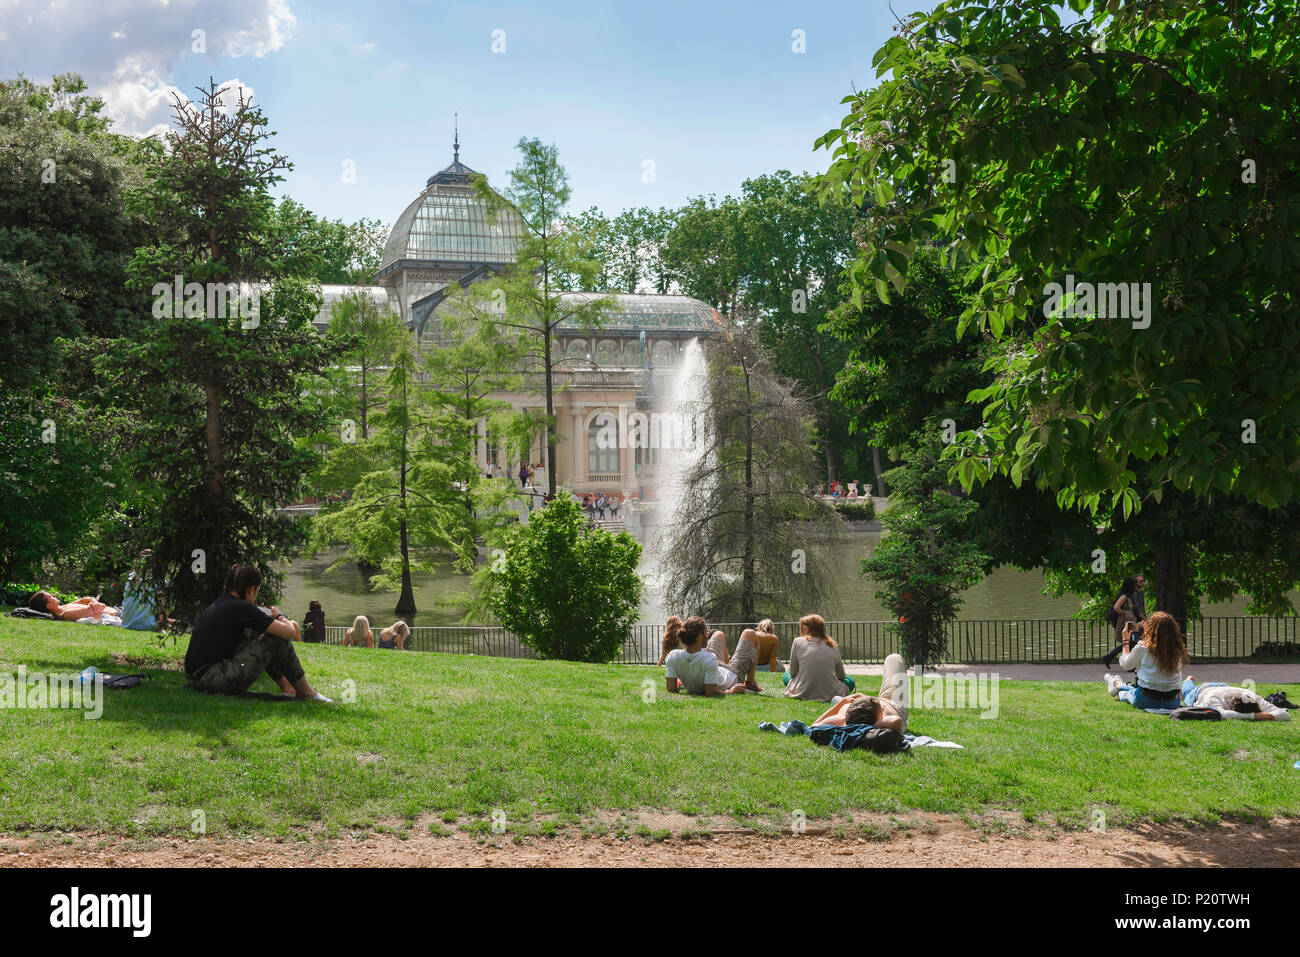 Madrid park summer, view of young people relaxing on a summer afternoon near the Palacio Cristal in the Parque del Retiro, Madrid, Spain. Stock Photo